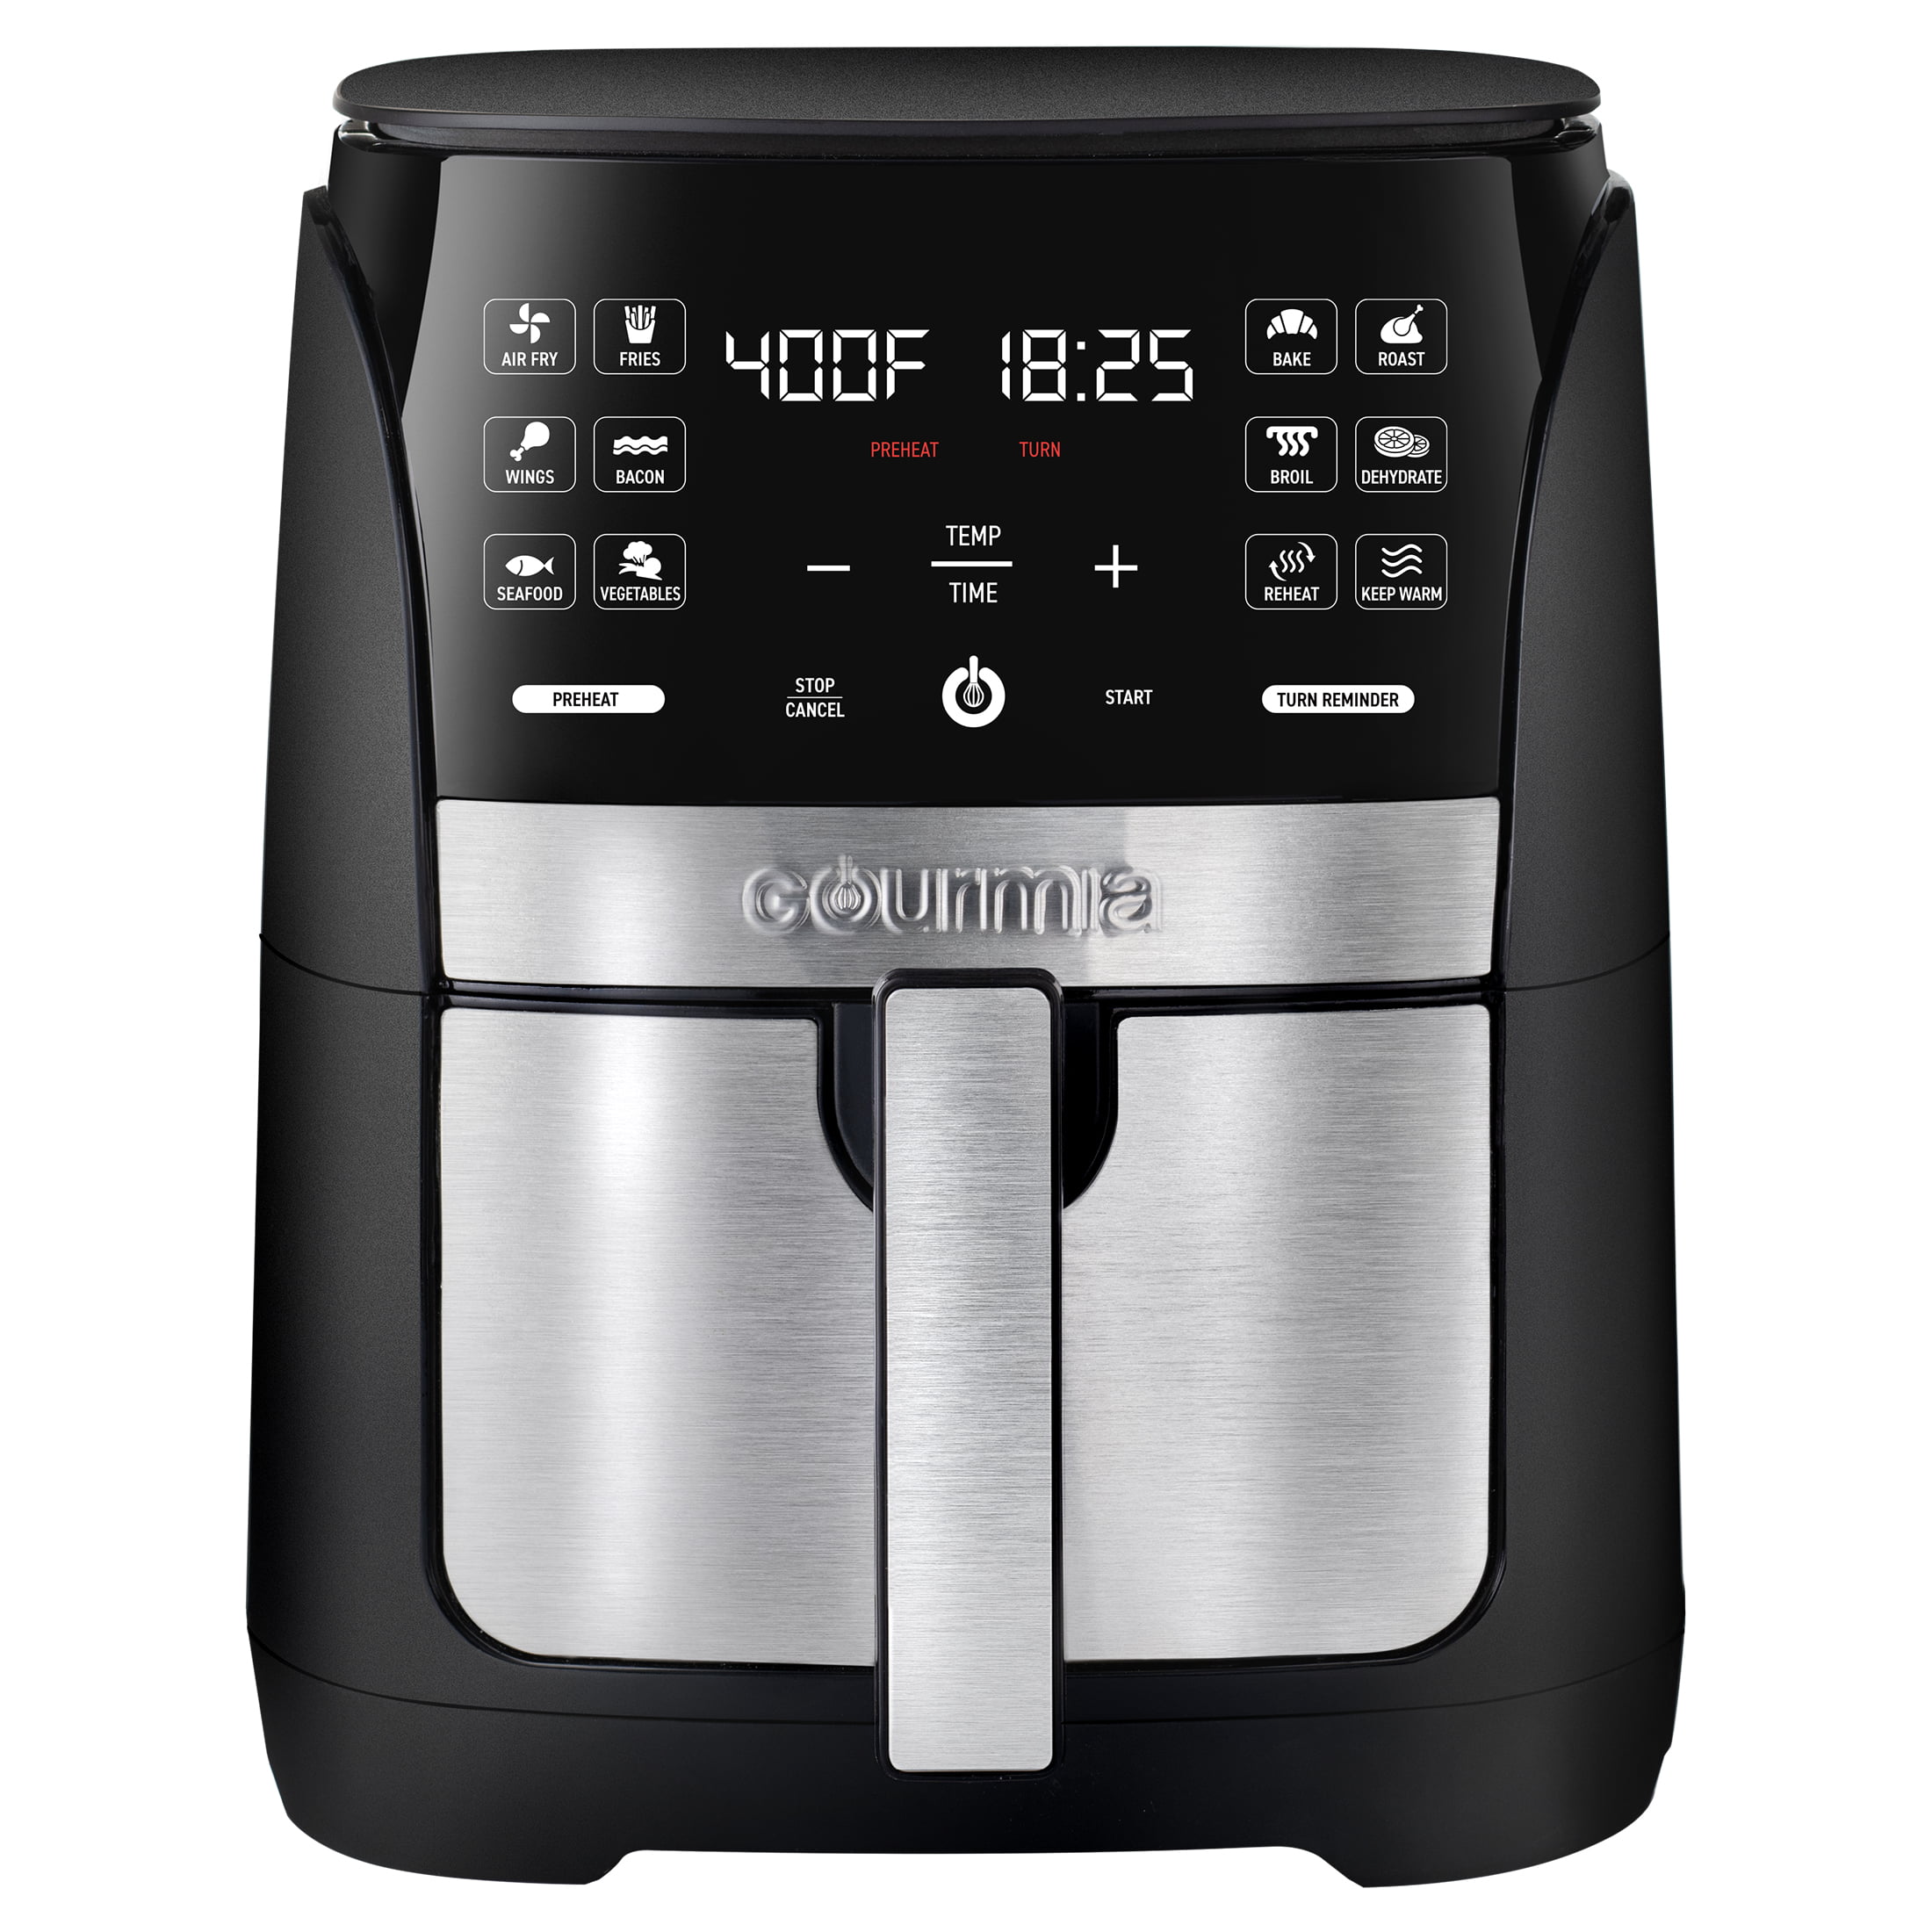 Gourmia 6 Qt Digital Air Fryer with Guided Cooking and 12 One-Touch Cooking Functions - Walmart.com 预告